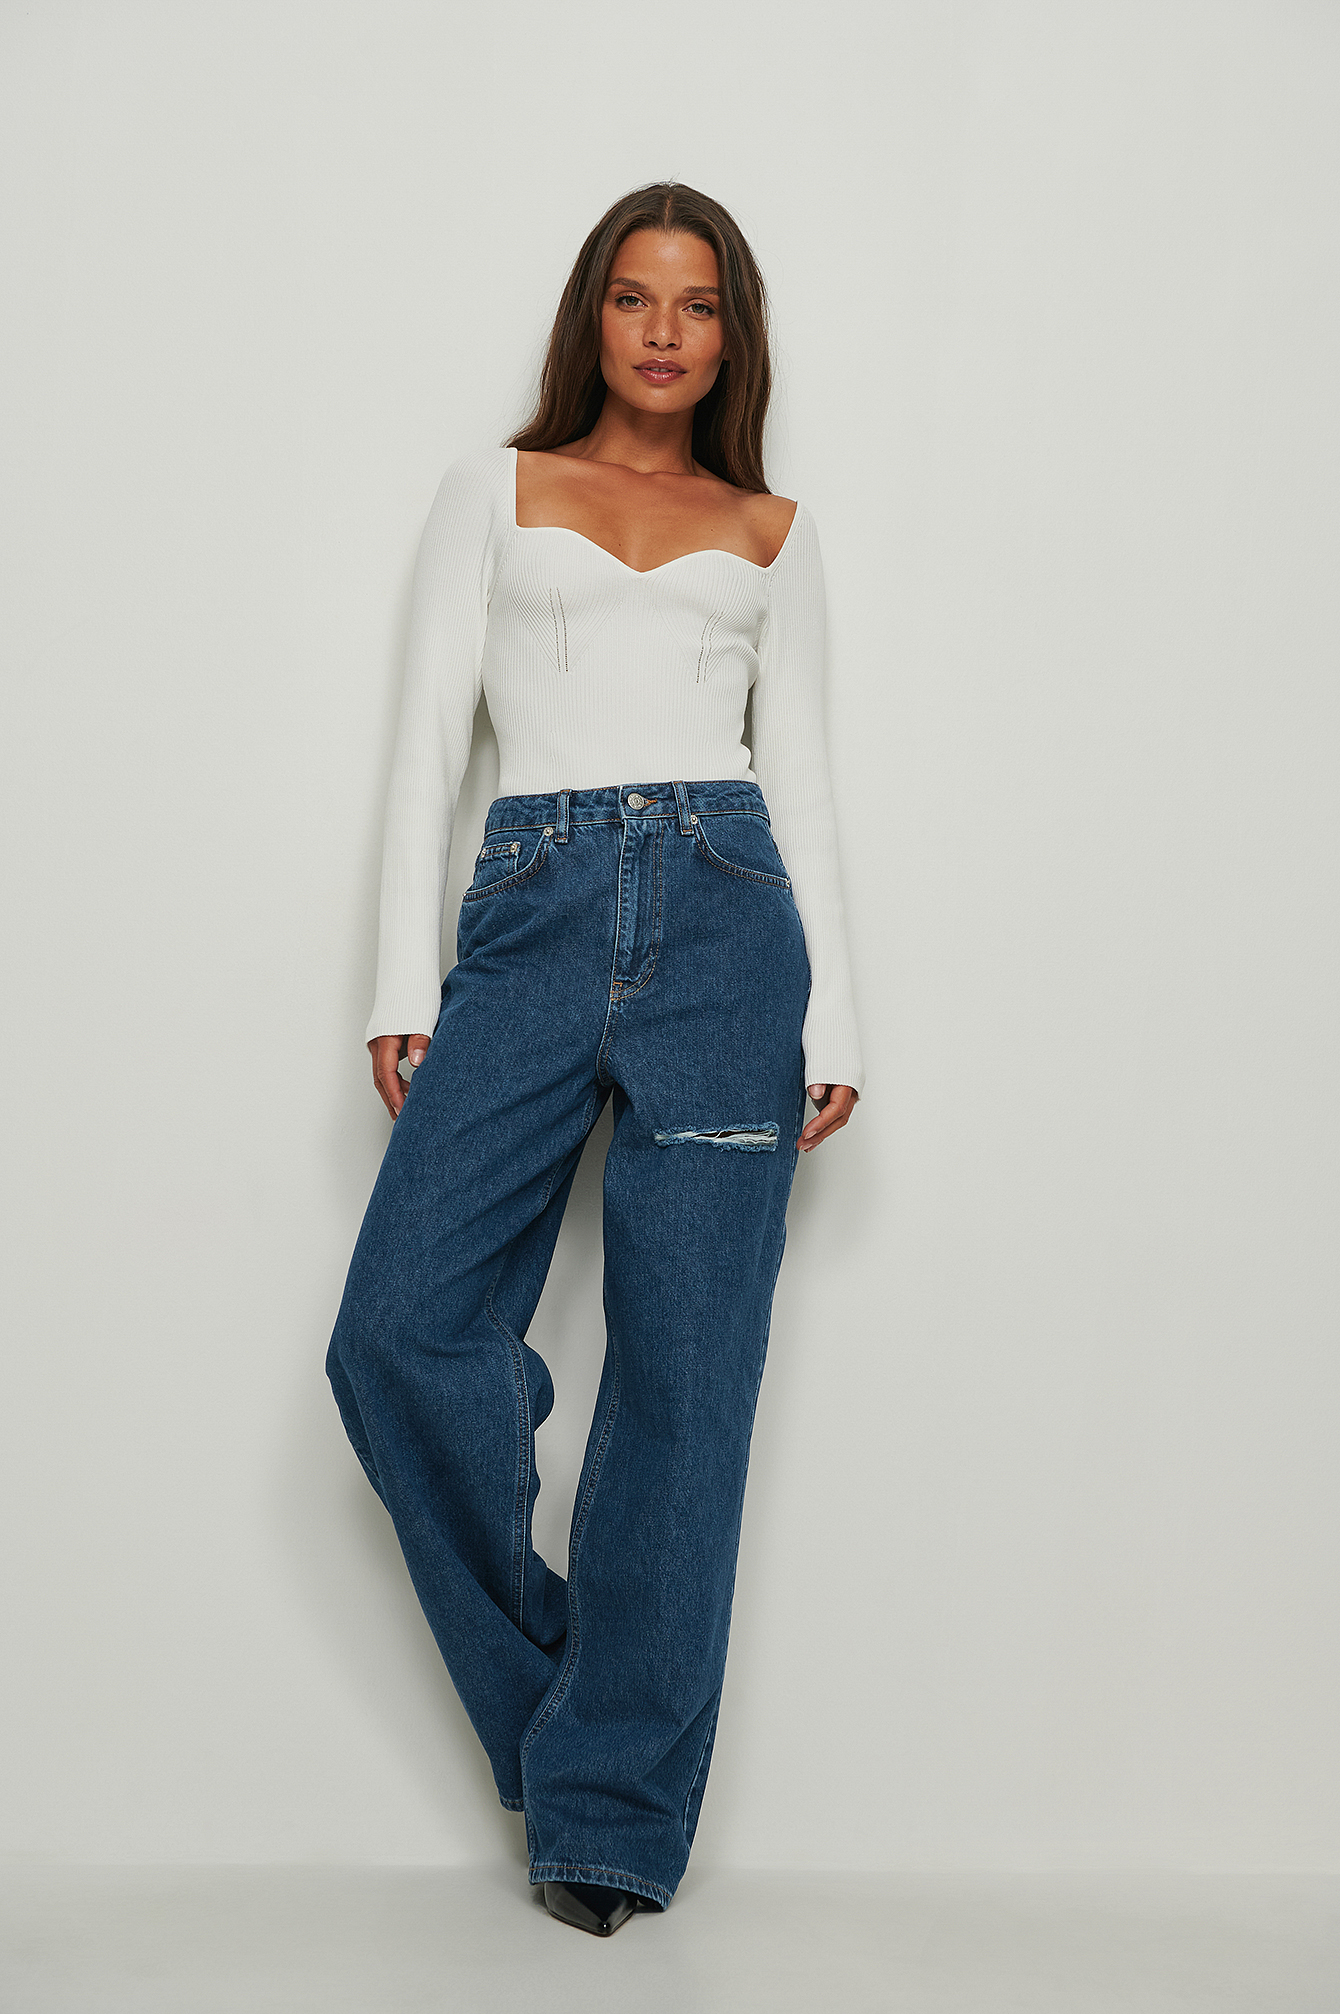 Wide Leg Thigh Detail Jeans Outfit